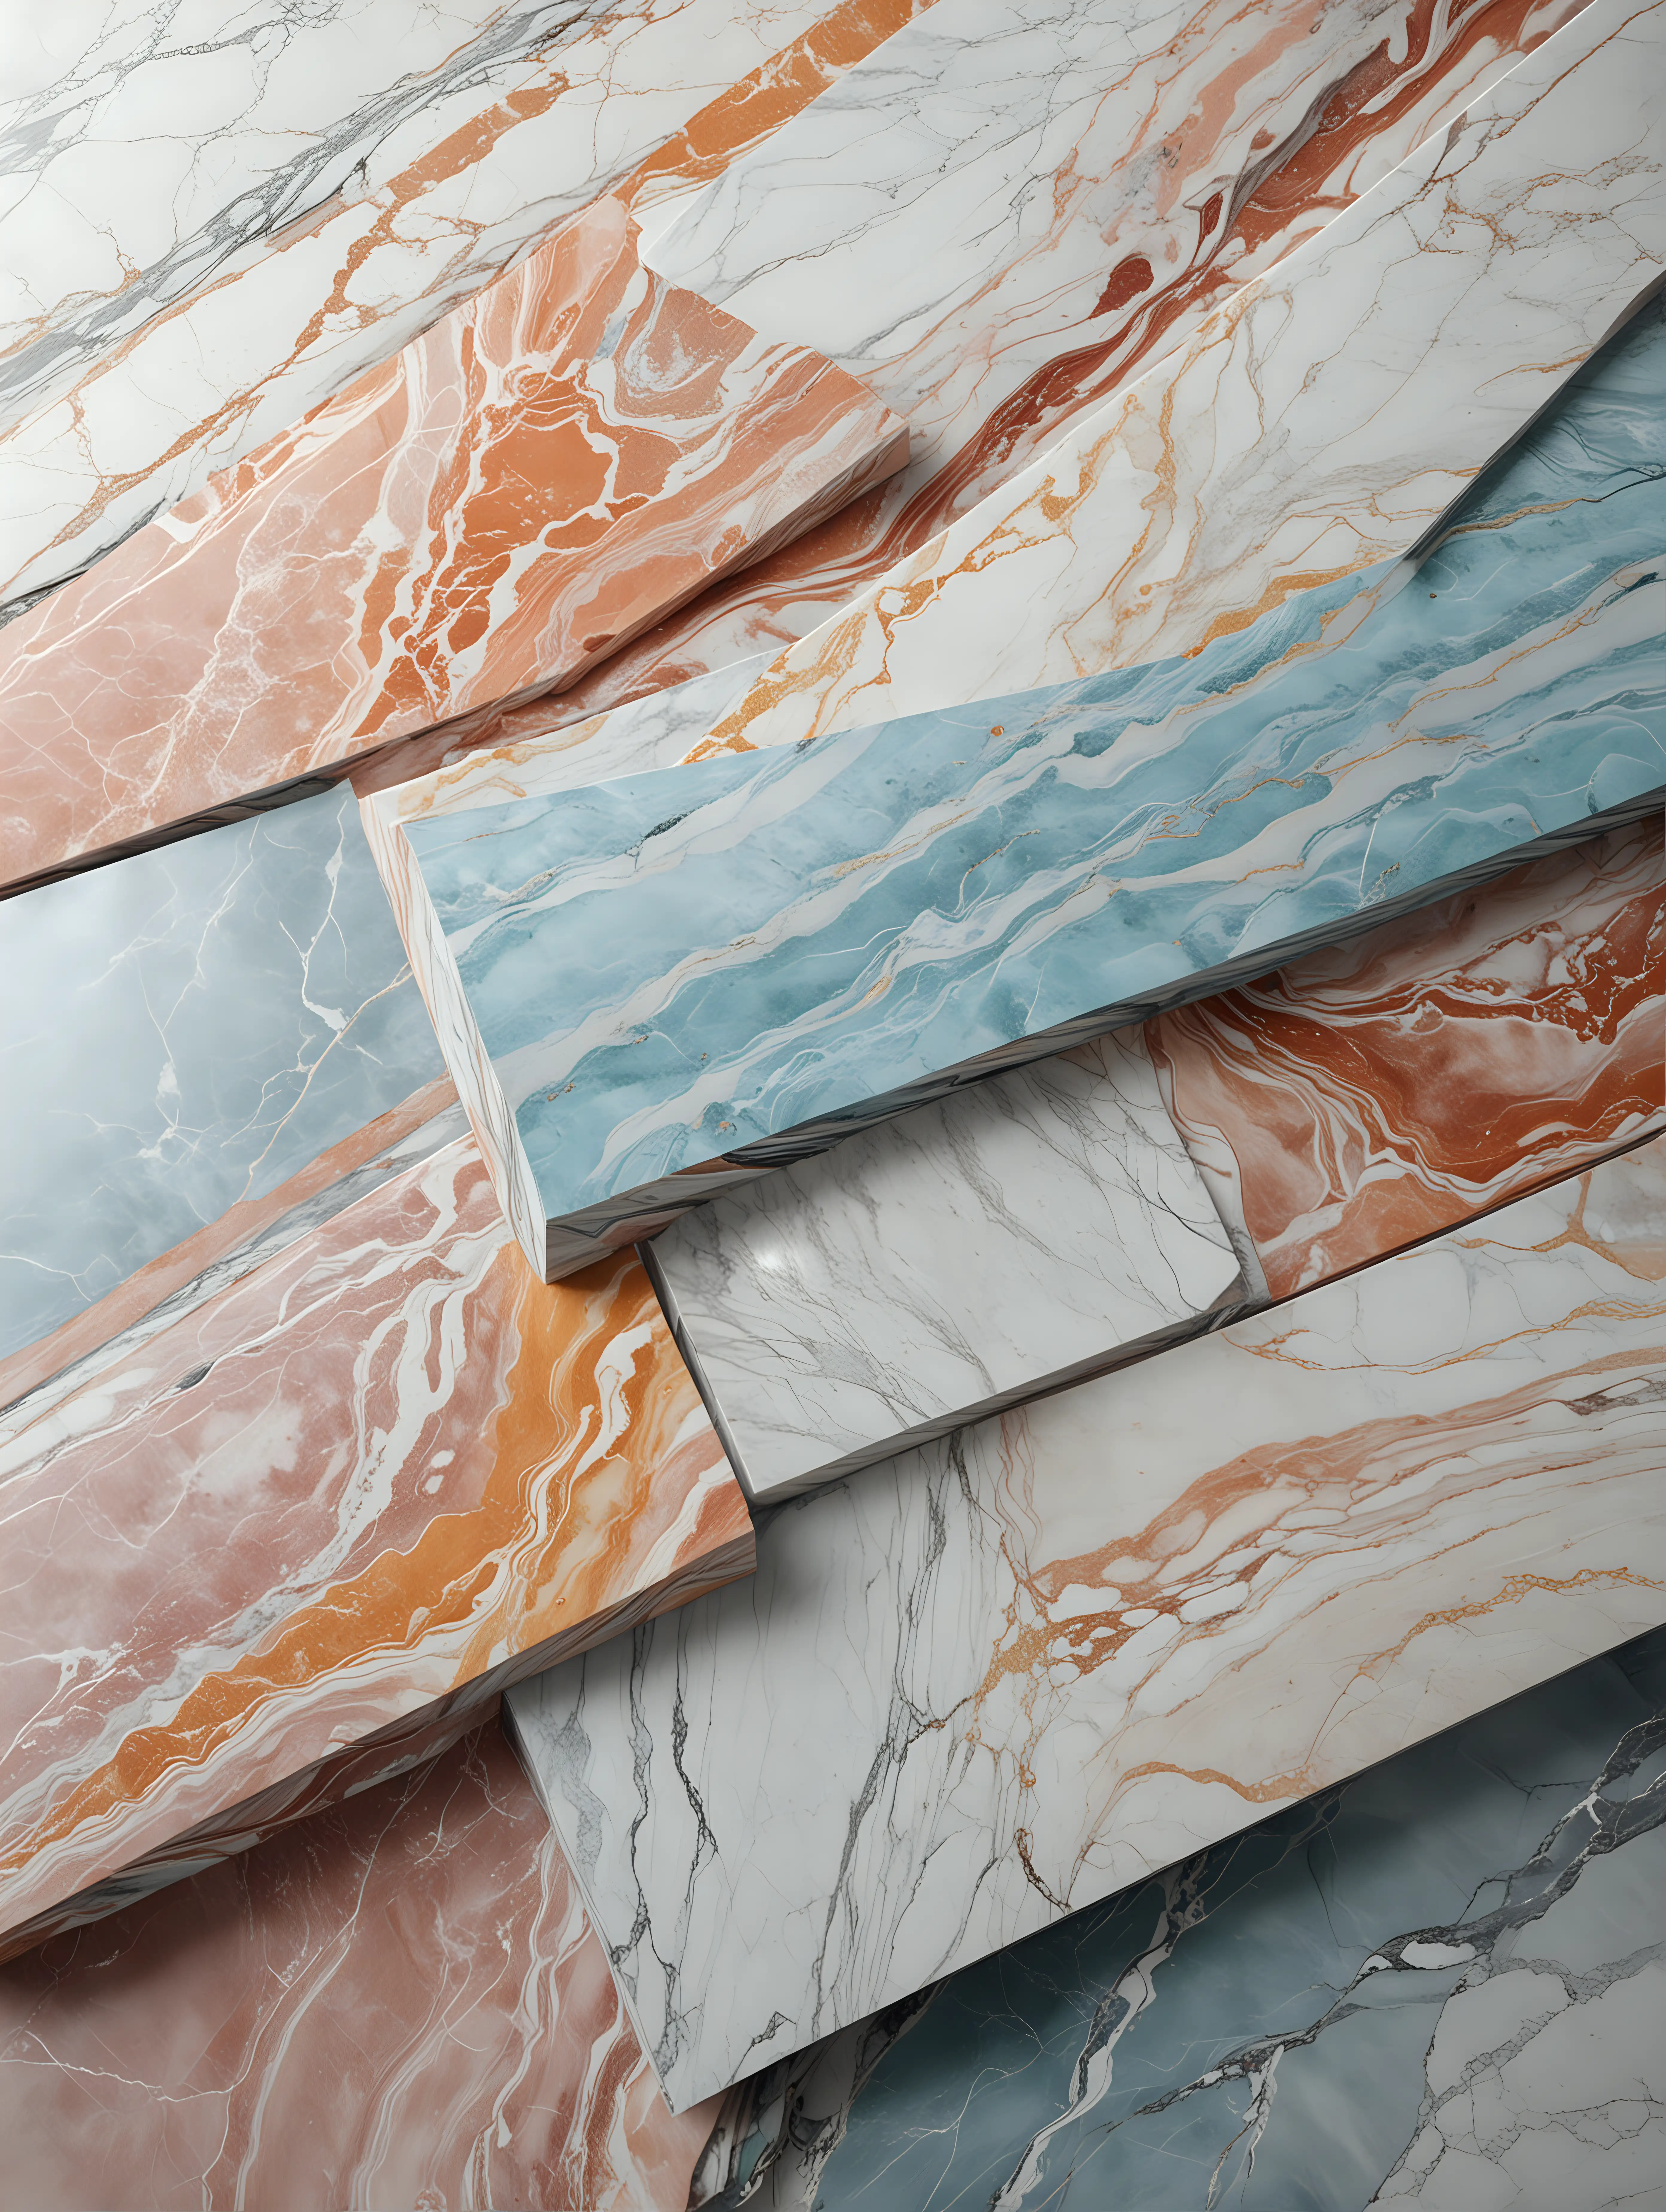 hyperrealistic marble large multicolored slabs lying one on top of the other